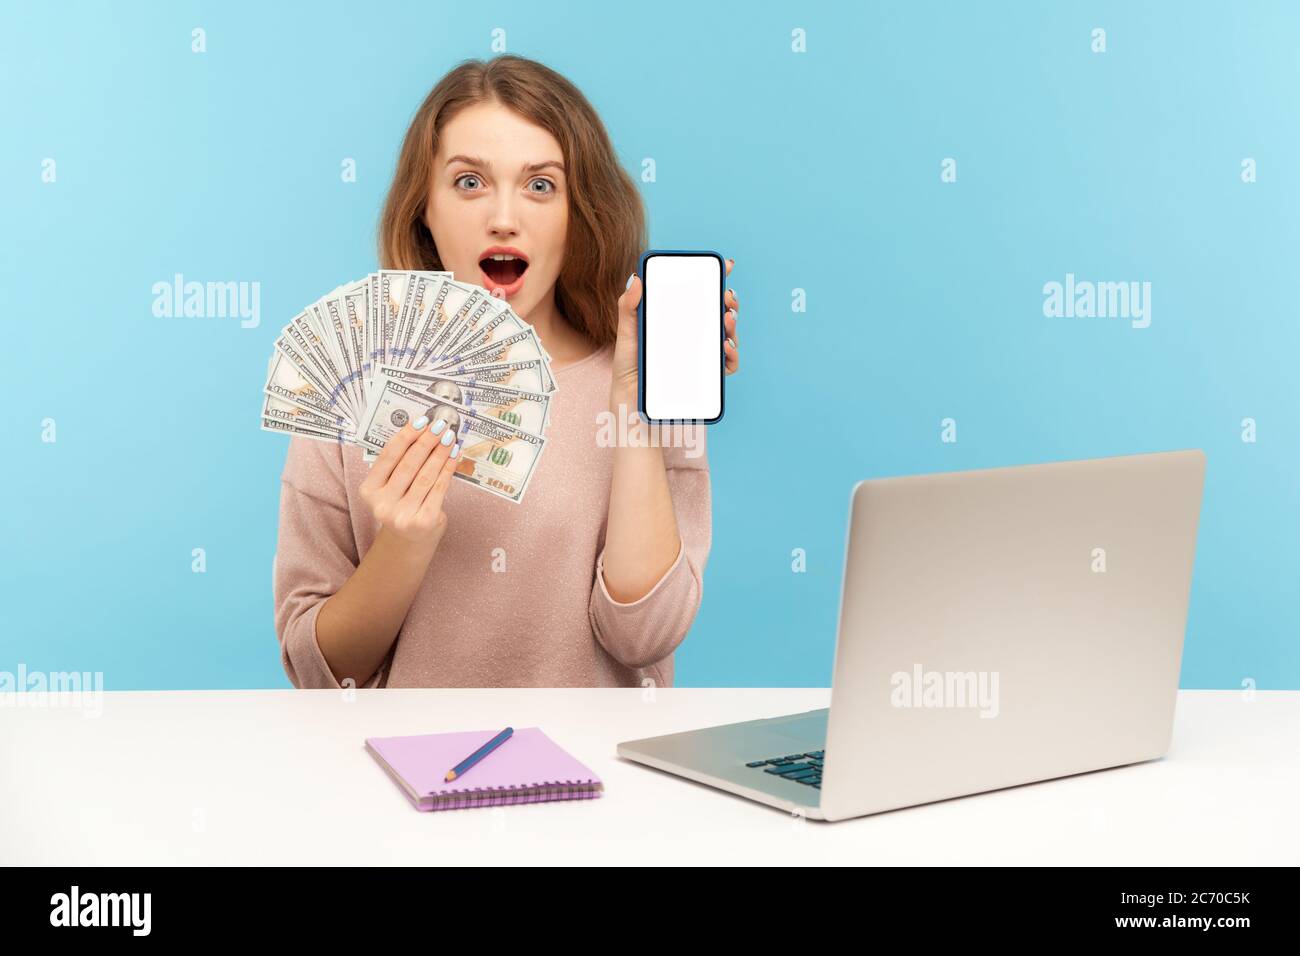 Internet earnings, online payment. Amazed woman freelancer sitting at workplace and holding dollar banknotes, showing smartphone with mockup display, Stock Photo